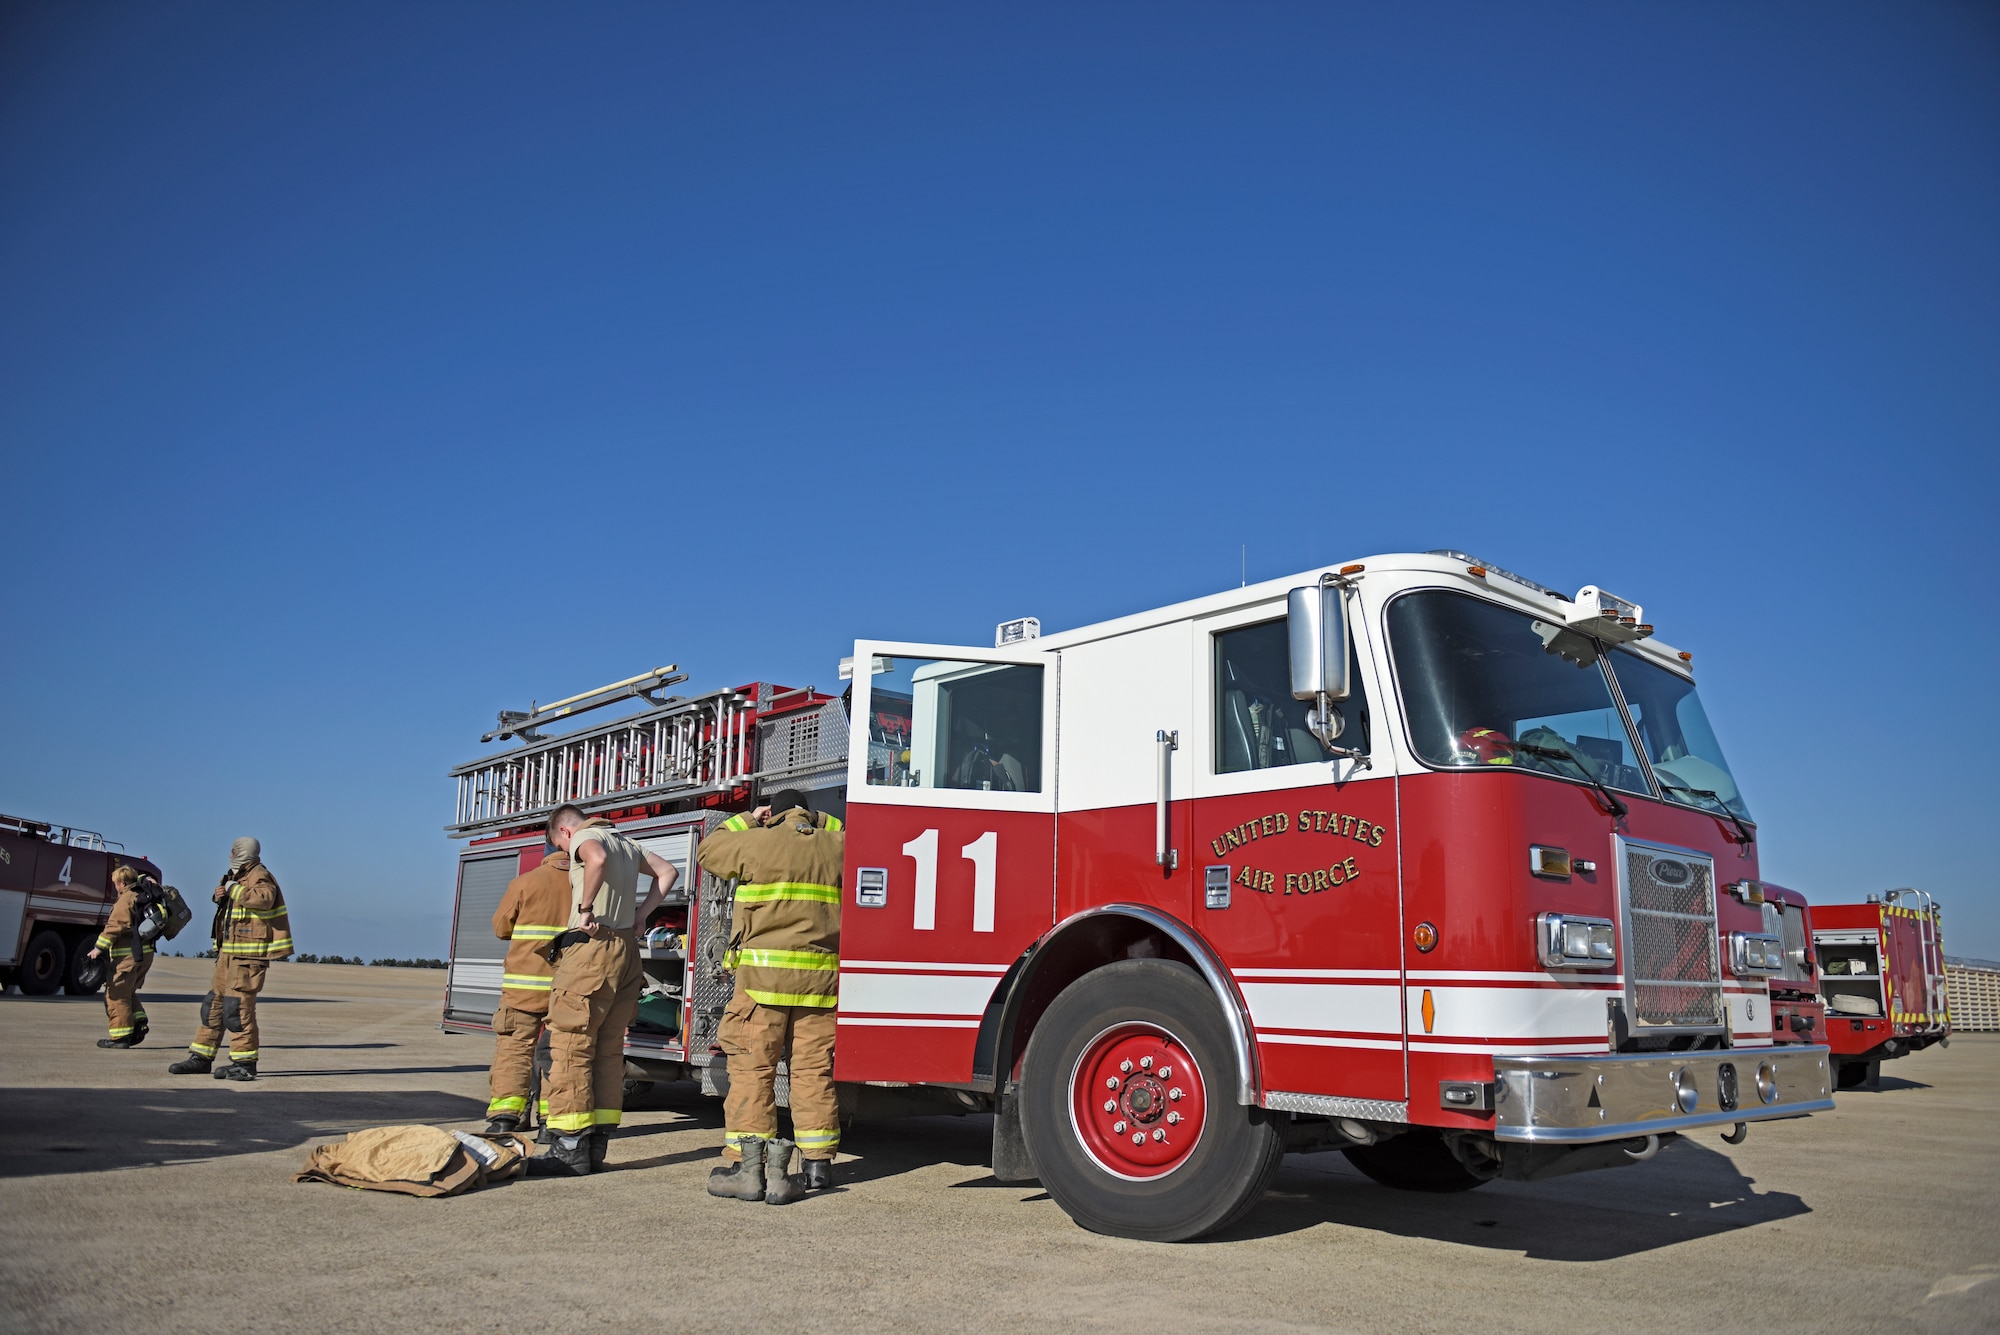 U.S. Air Force firefighters assigned to the 8th Civil Engineer Squadron prepare to conduct live fire training at Kunsan Air Base, Republic of Korea, Nov. 20, 2019. Conducting training allows firefighters to practice and perfect strategies to successfully fight fires in real-world scenarios. (U.S. Air Force photo by Staff Sgt. Mackenzie Mendez)